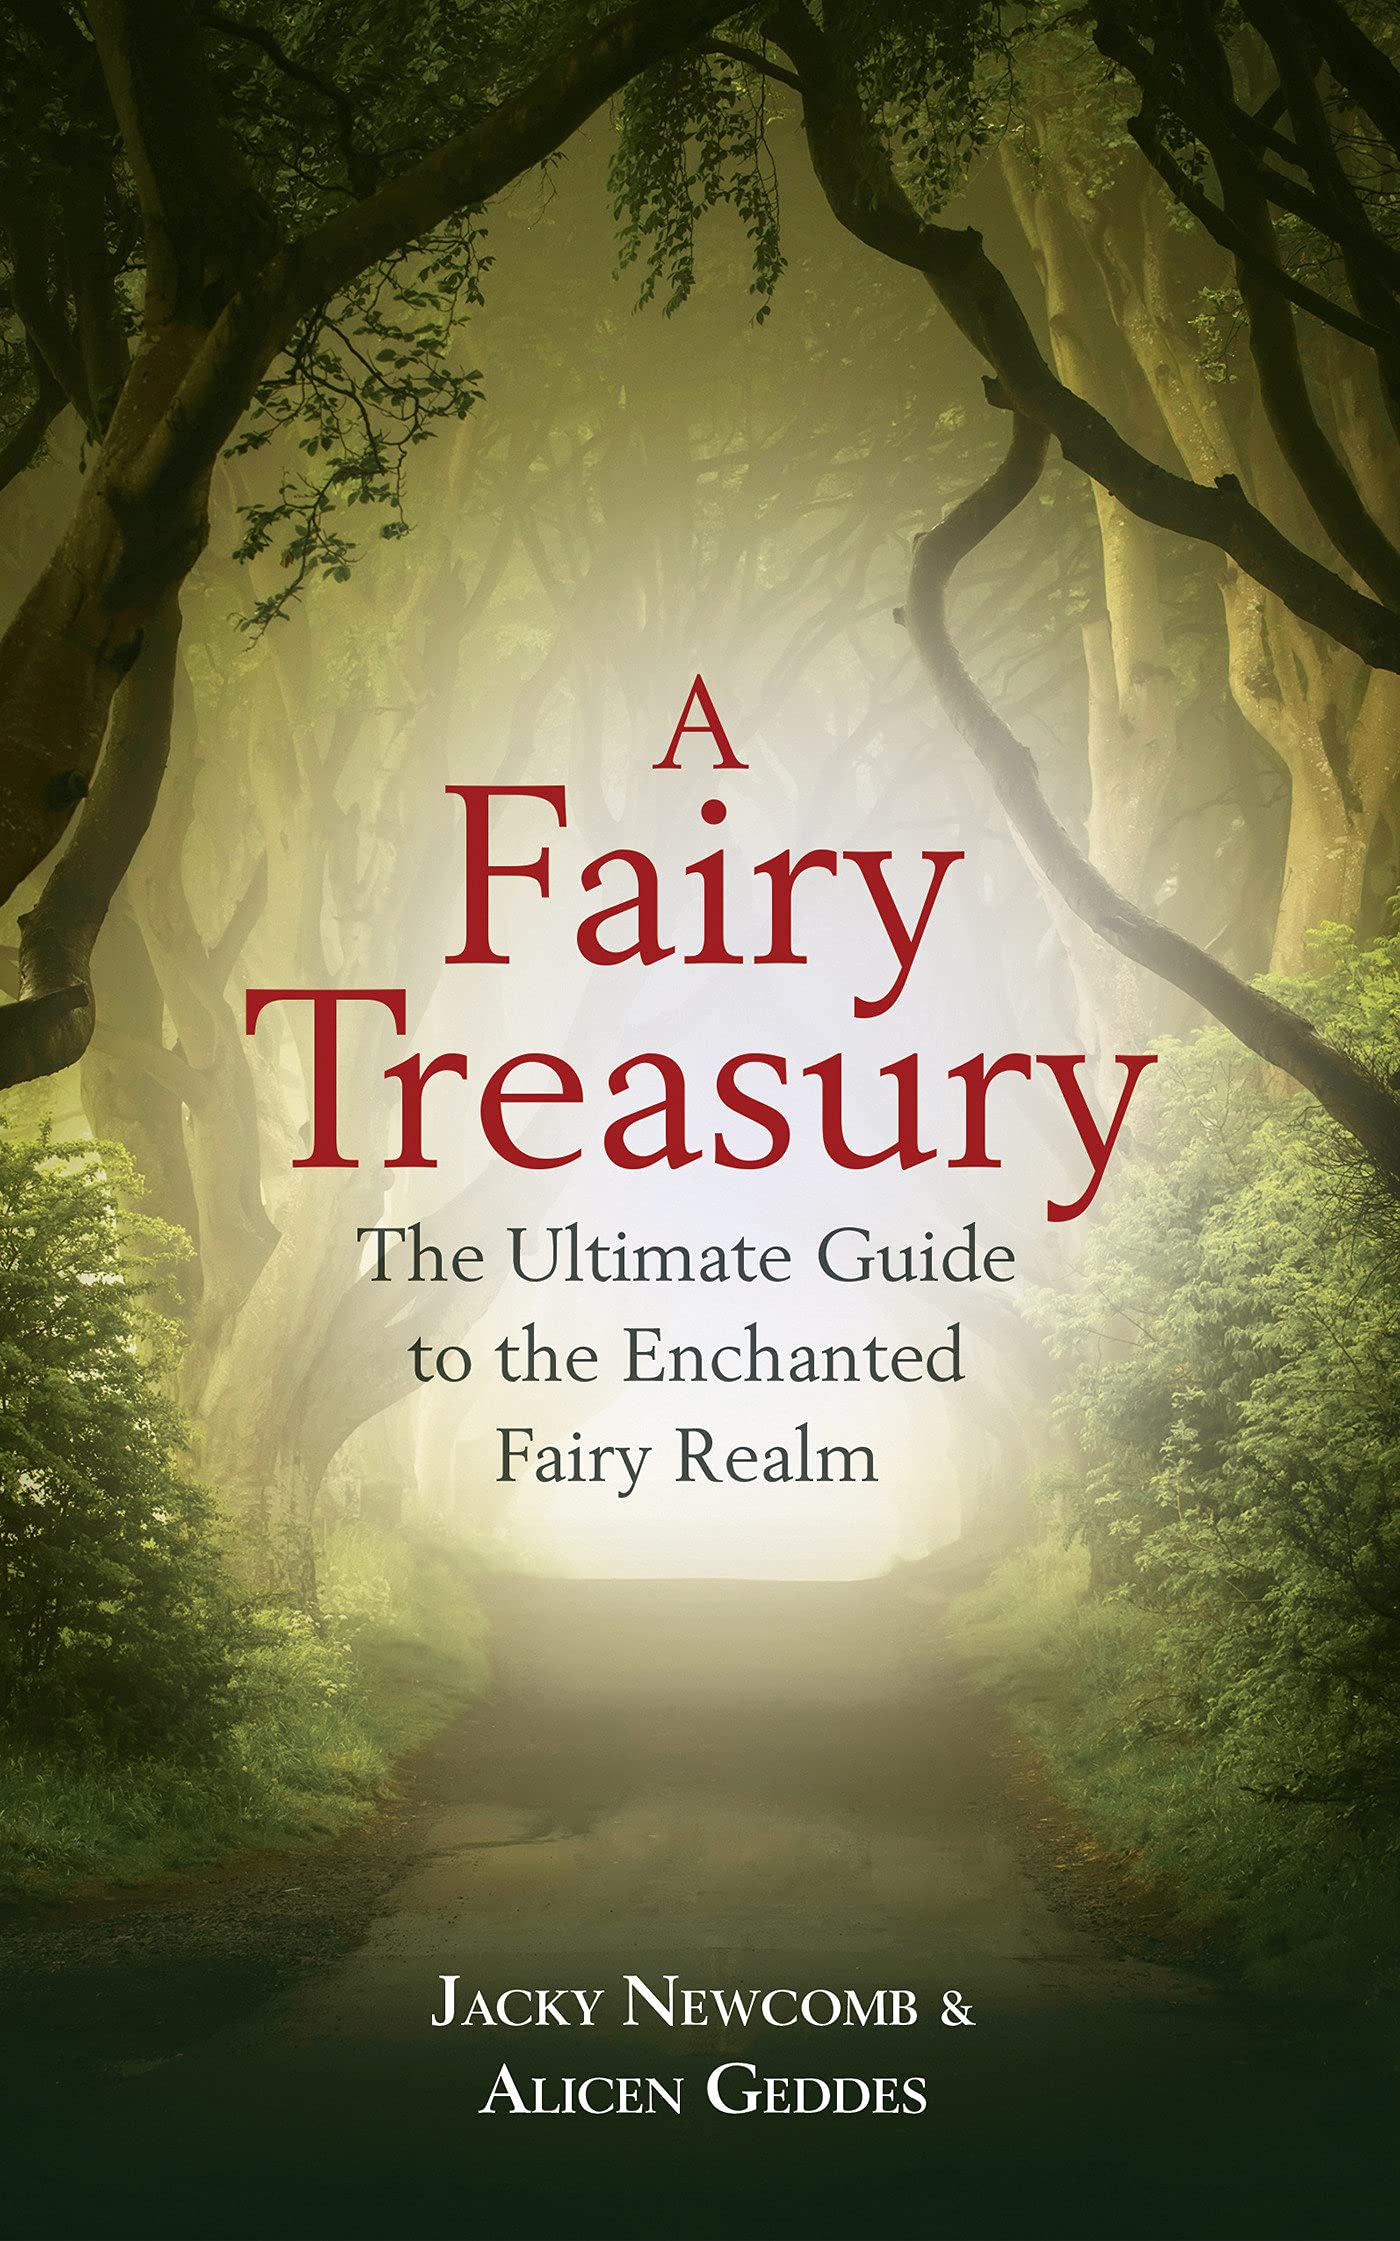 A Fairy Treasury The Ultimate Guide to the Enchanted Fairy Realm